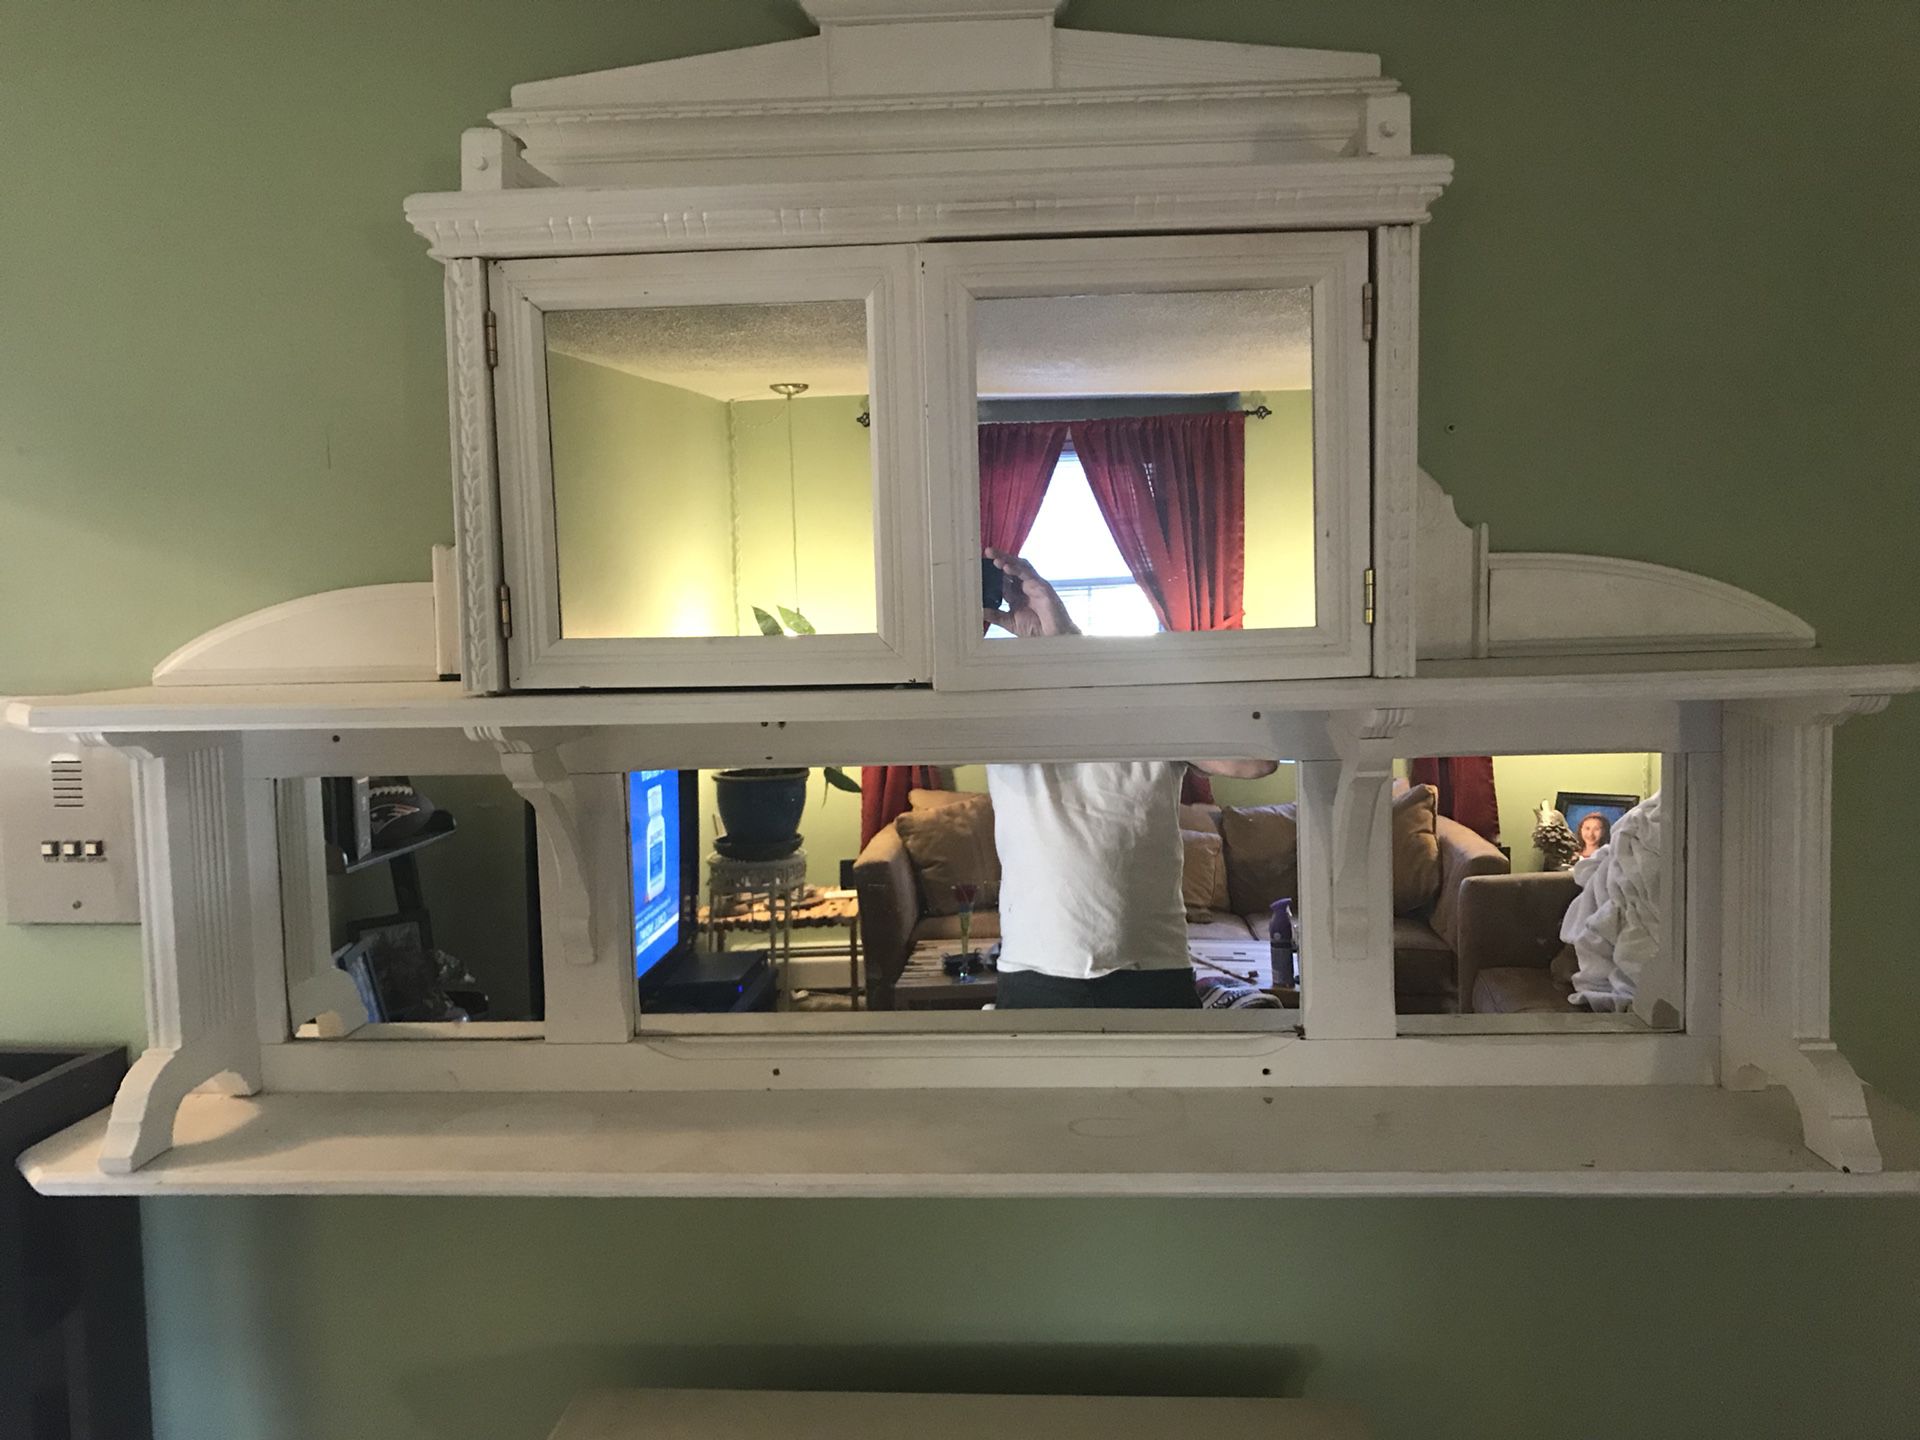 Refinished fireplace mantle/ mirrored cabinet shelf